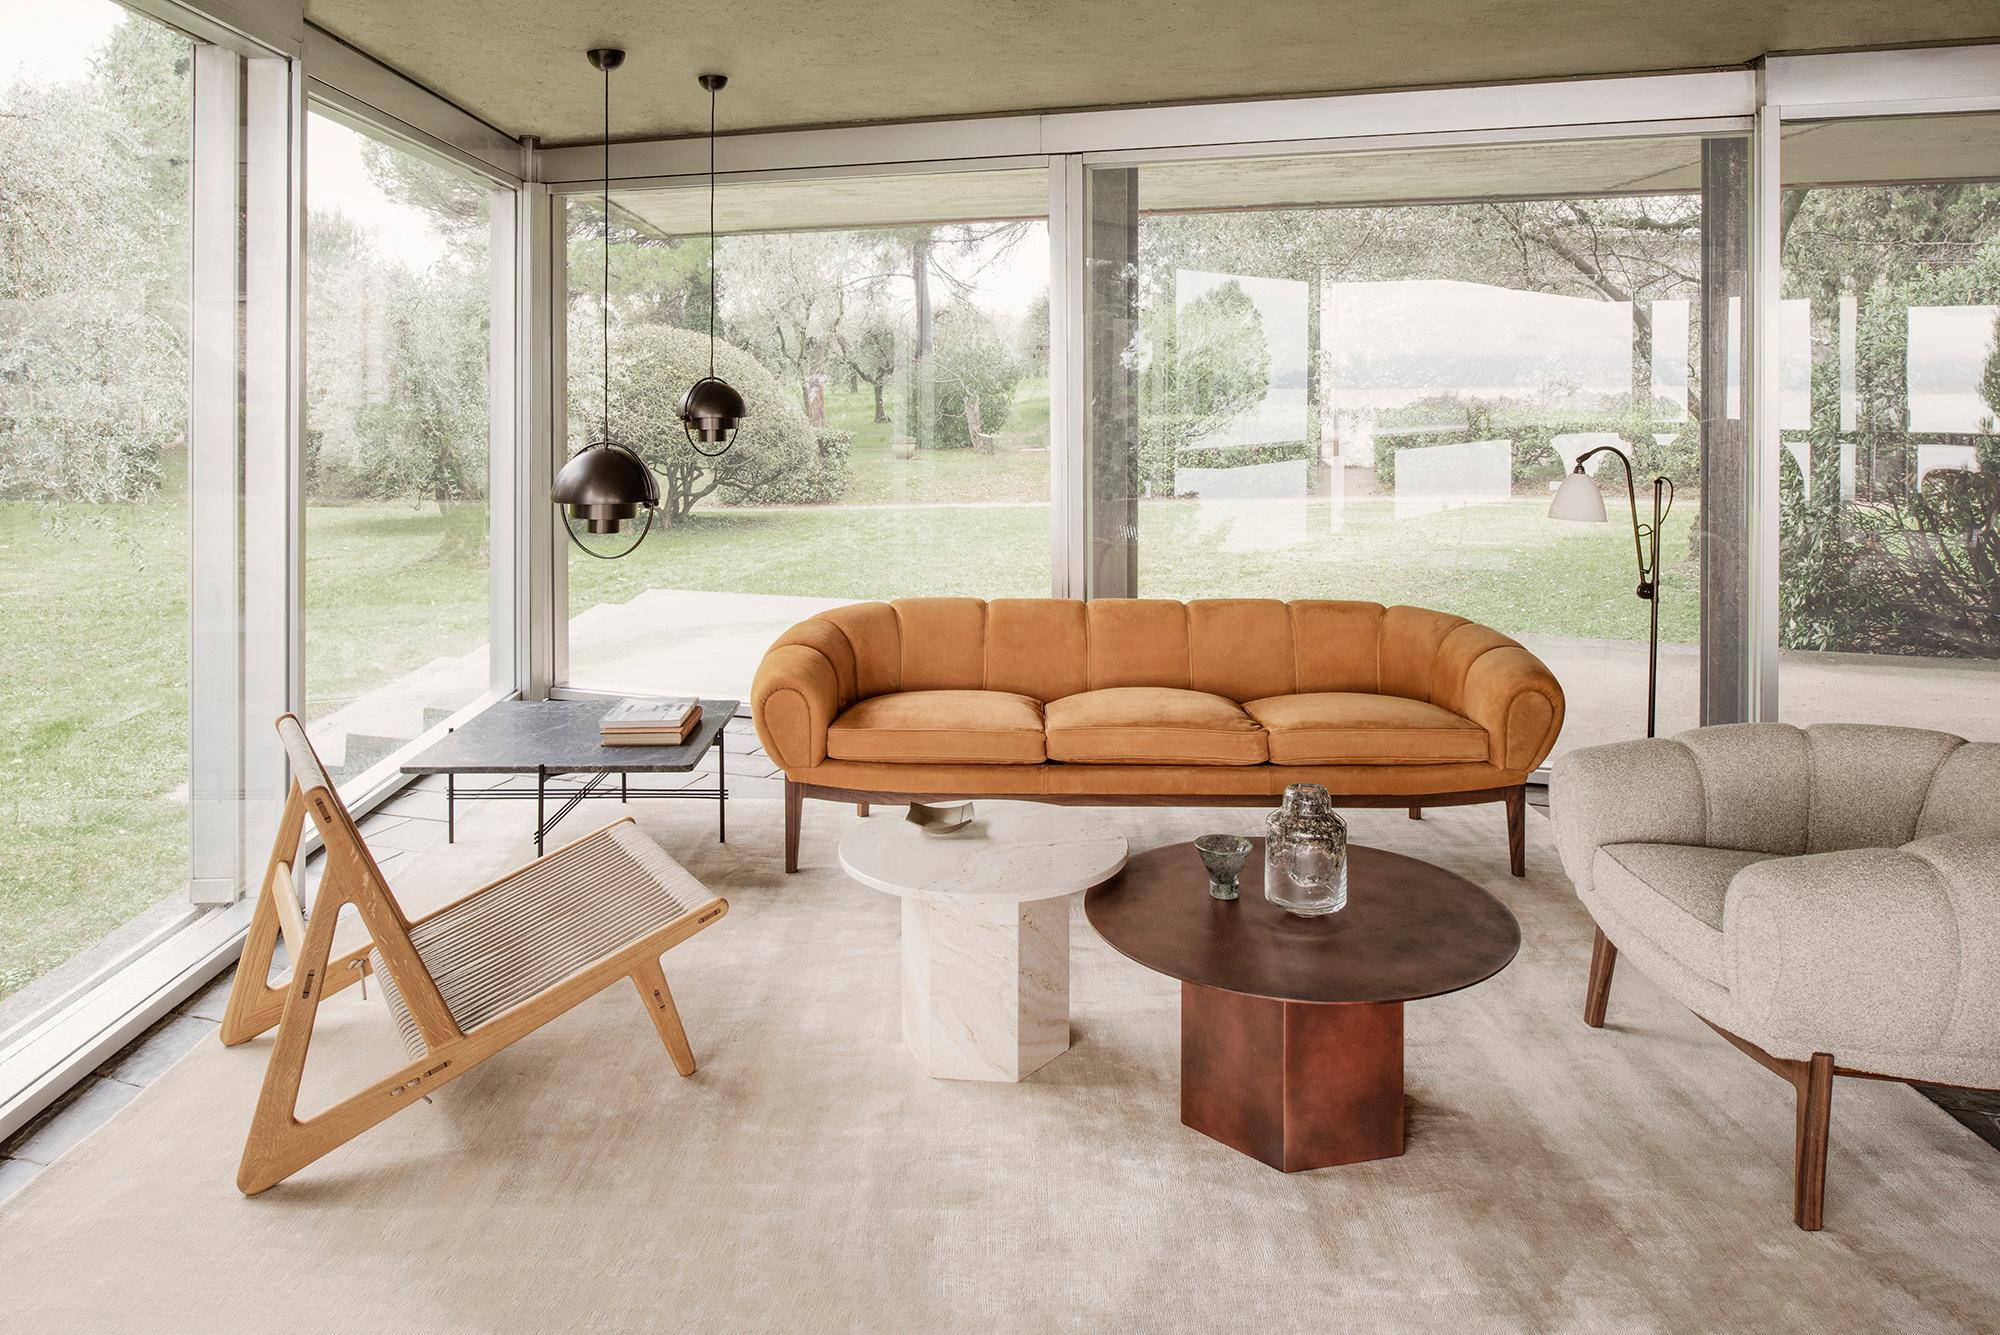 Leather 'Croissant' Sofa by Illum Wikkelsø for Gubi with Oak Legs In New Condition For Sale In Glendale, CA